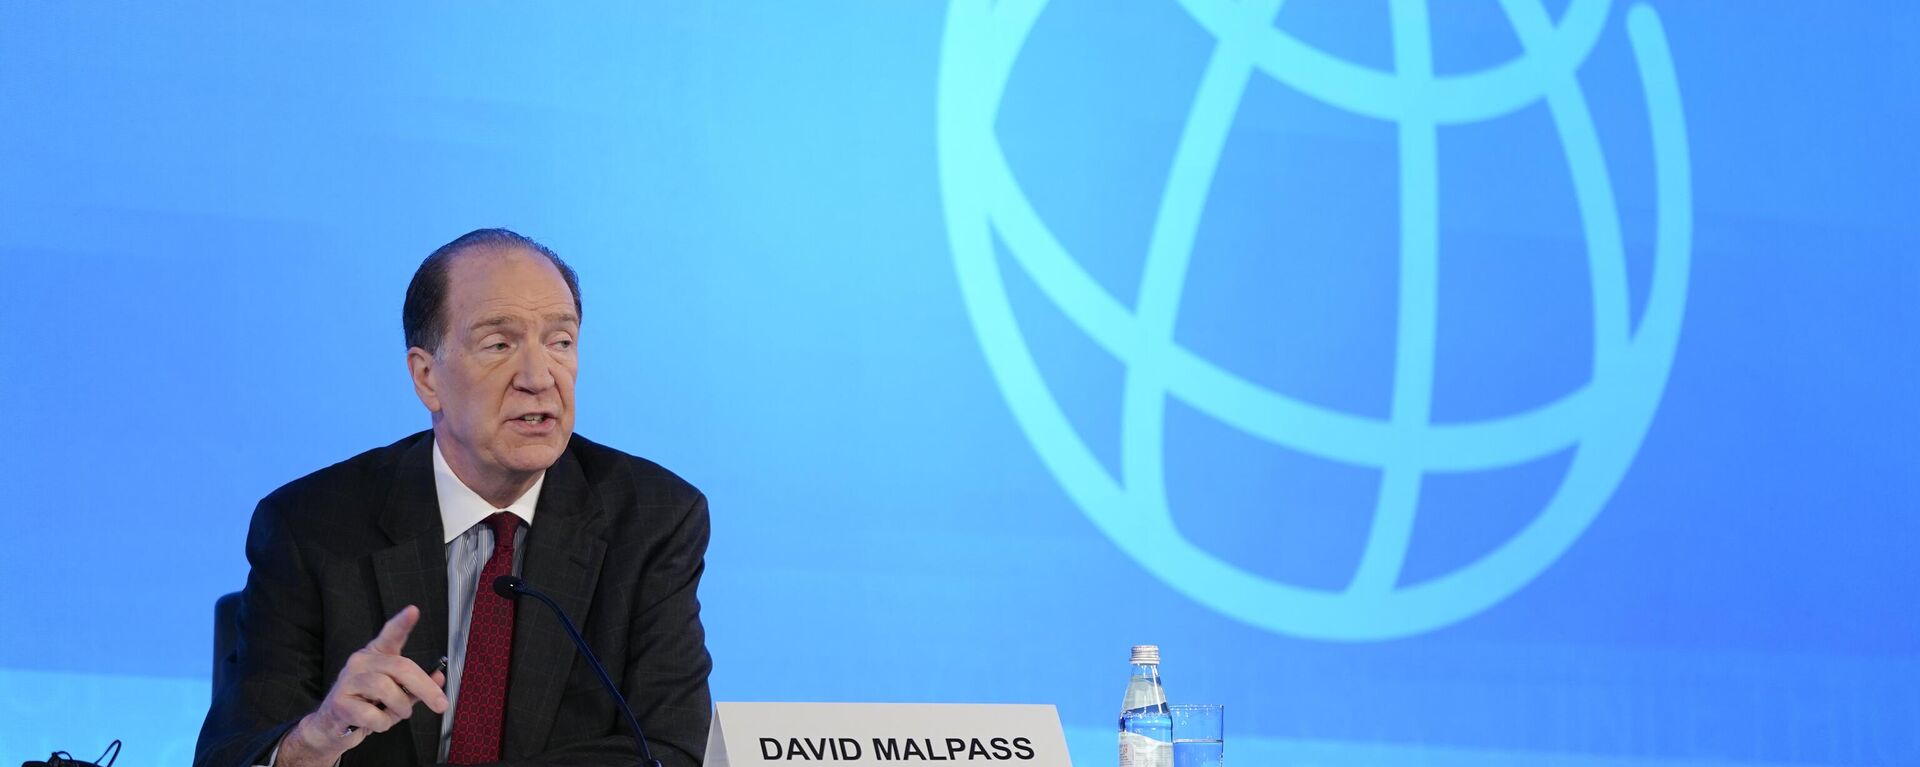 World Bank Group President David Malpass speaks at a news conference during the 2022 annual meeting of the International Monetary Fund and the World Bank Group, Thursday, Oct. 13, 2022, in Washington. - Sputnik International, 1920, 15.02.2023